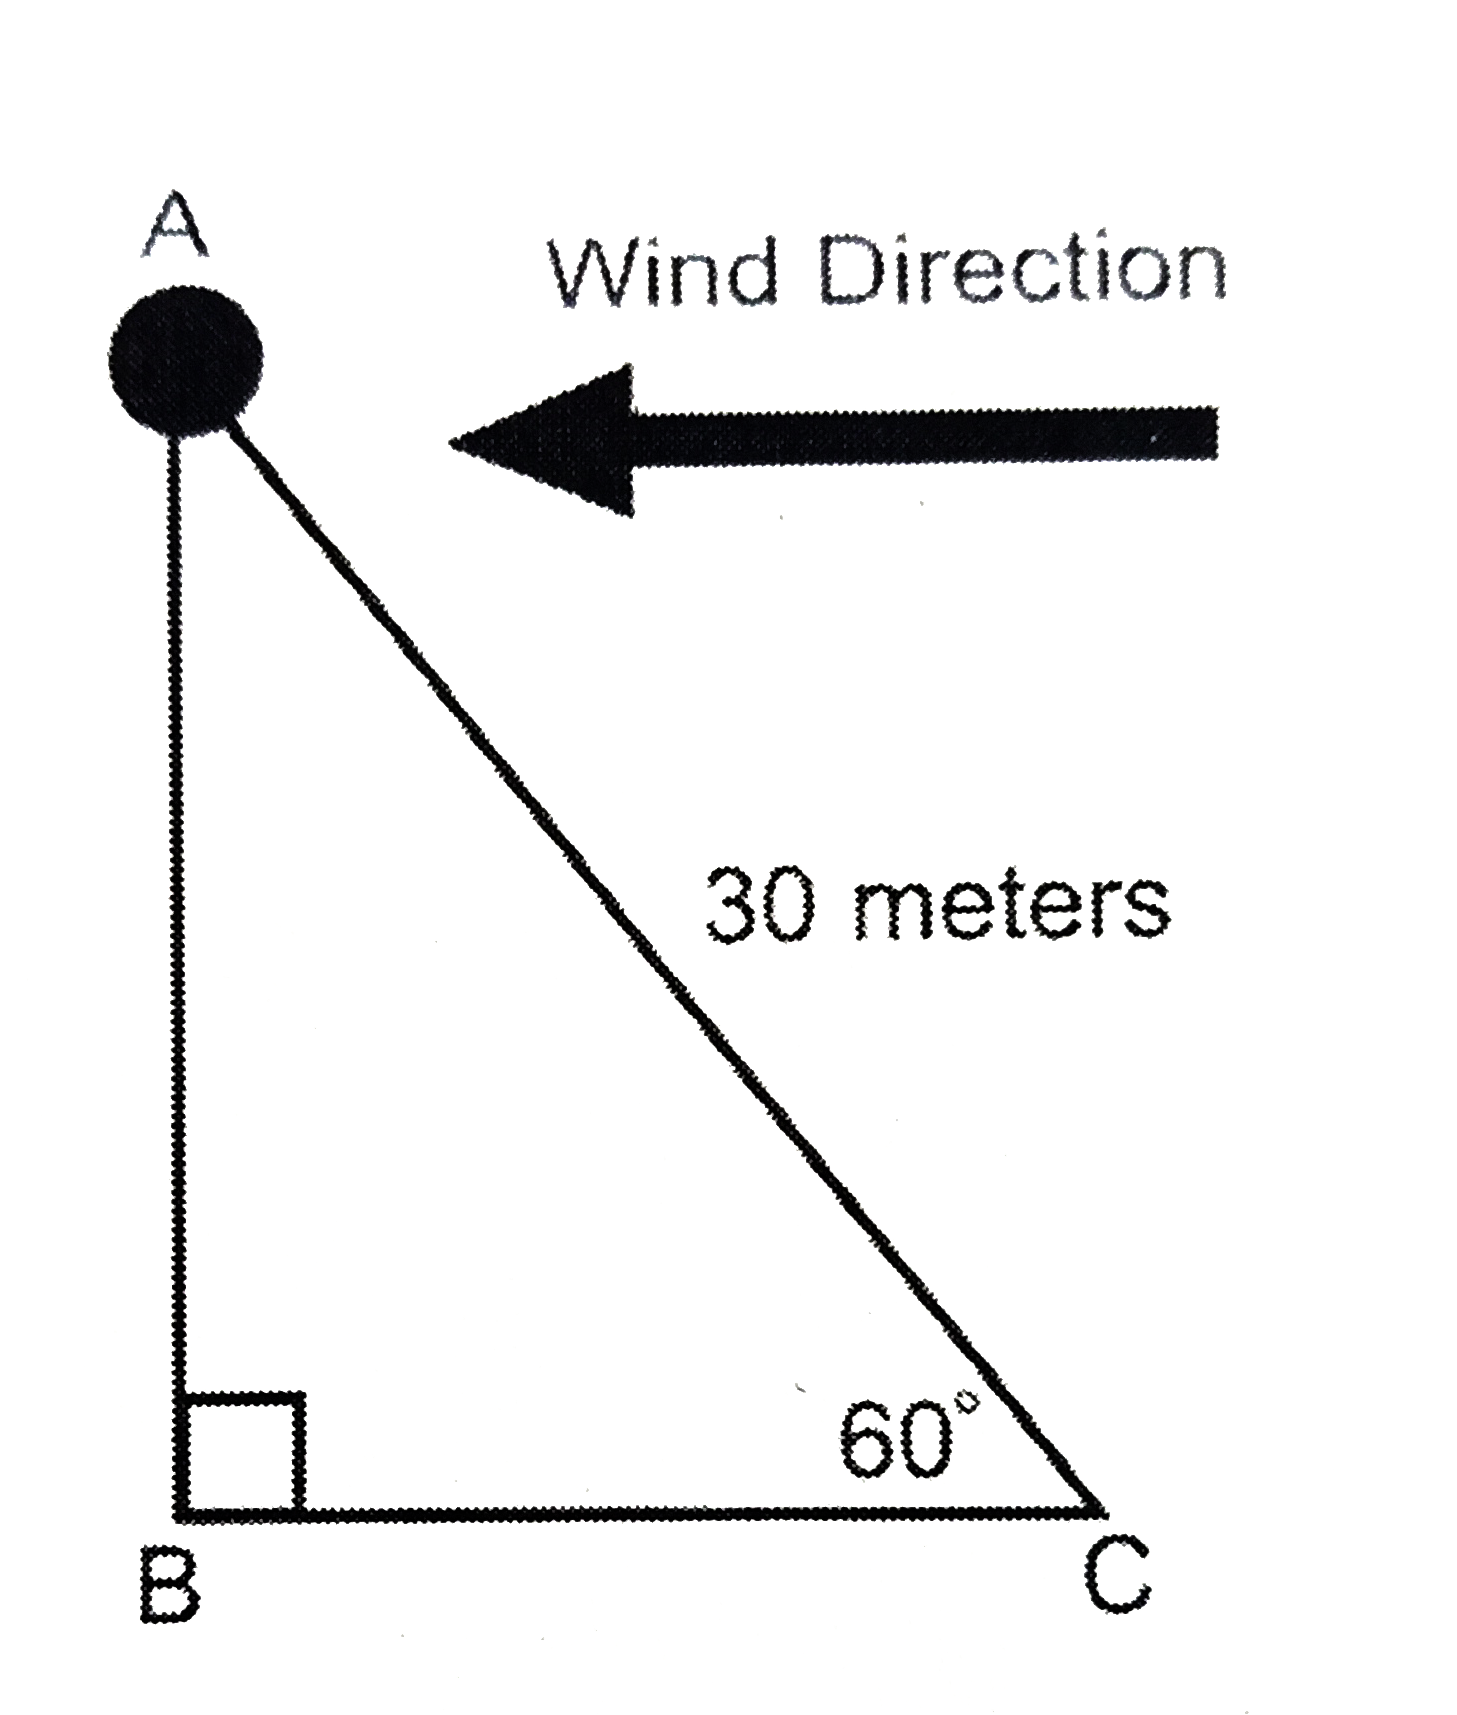 A hot air balloon was tied to a point on the ground using a rope 60m long. If the rope makes an angle of 60^(@) with the ground, how high, in meters, is the balloon above the ground level?